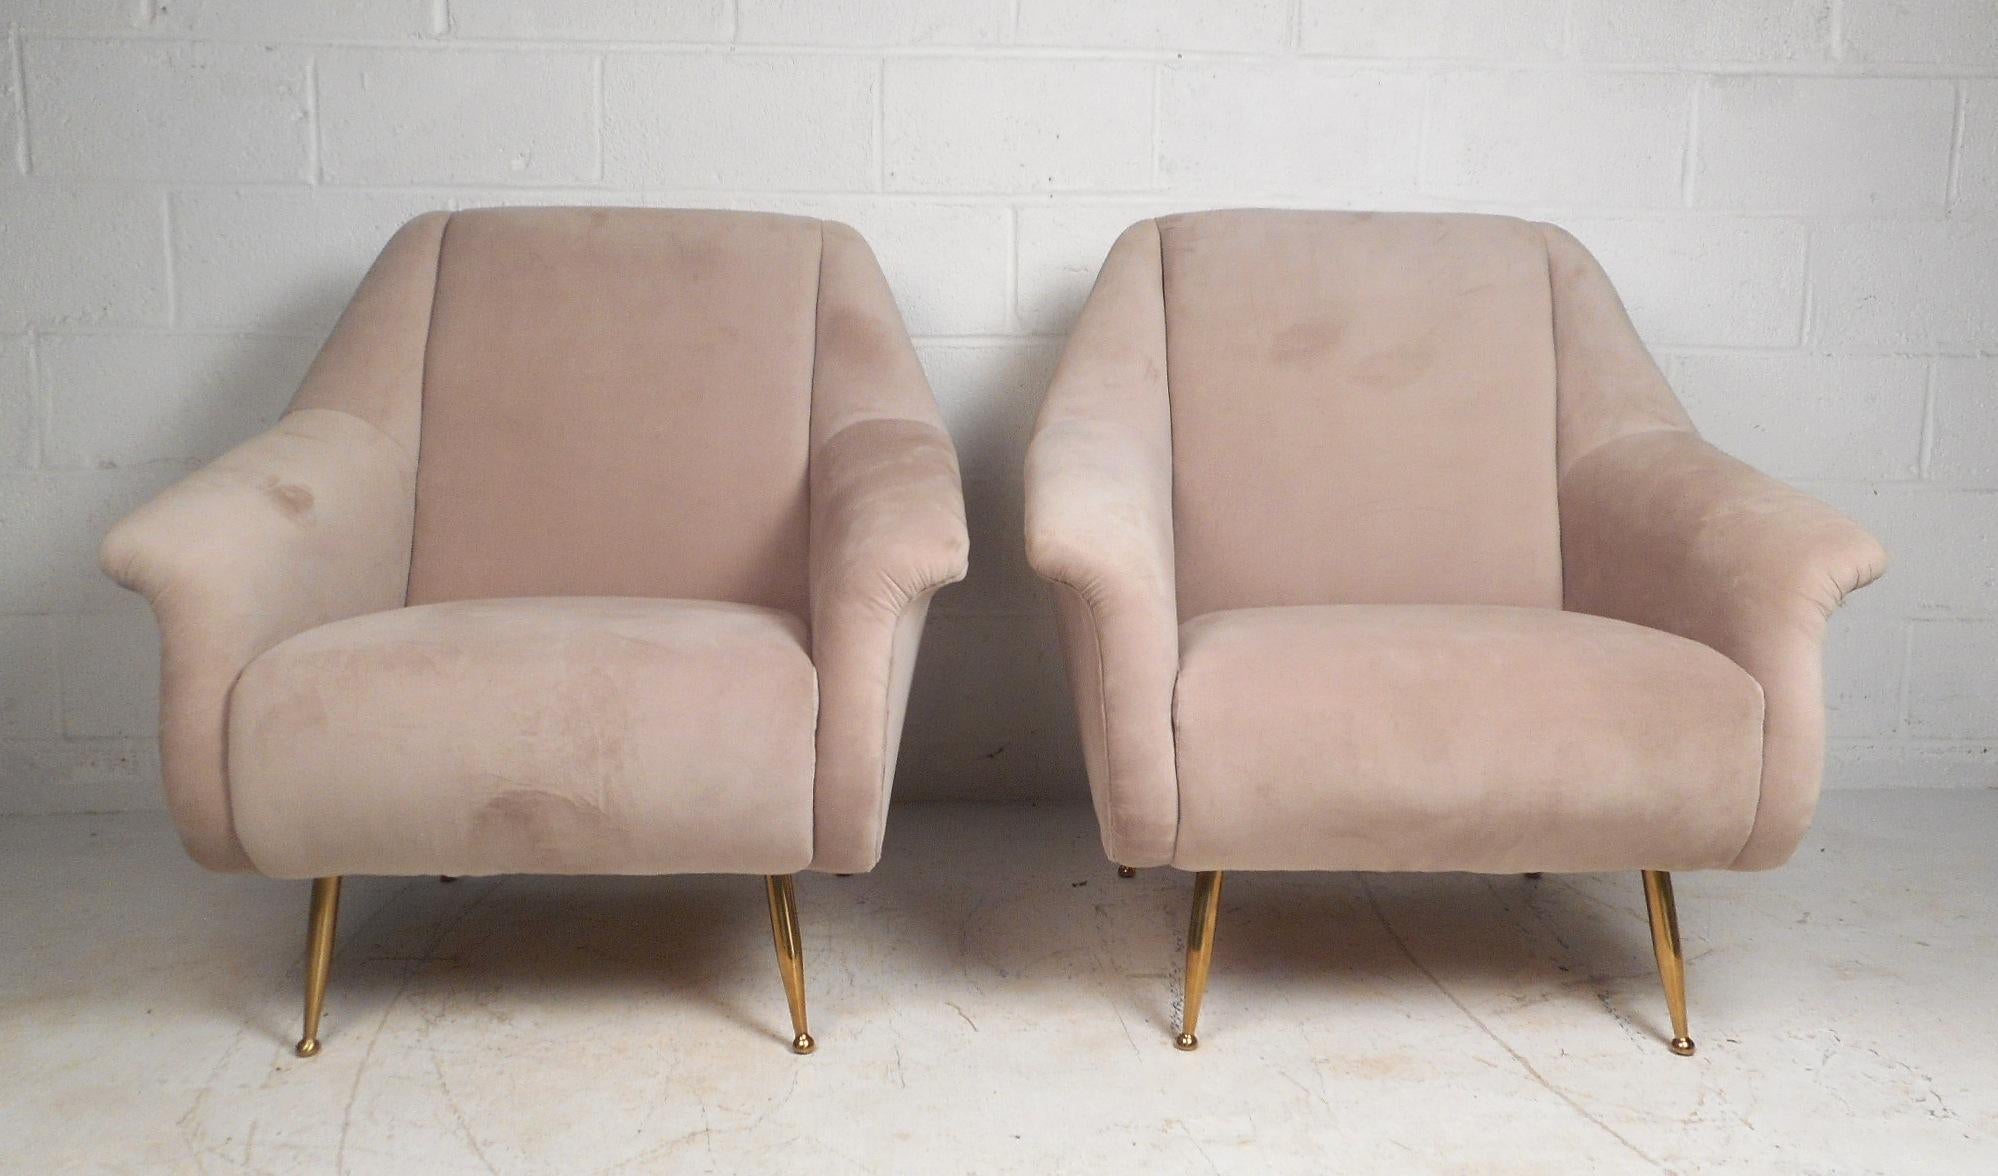 This gorgeous pair of Italian style lounge chairs are the height of comfort. These chairs feature wide and thick seat cushions for a delightful sitting experience. The chairs have winged armrests along with a high back. Wrapped in a plush upholstery